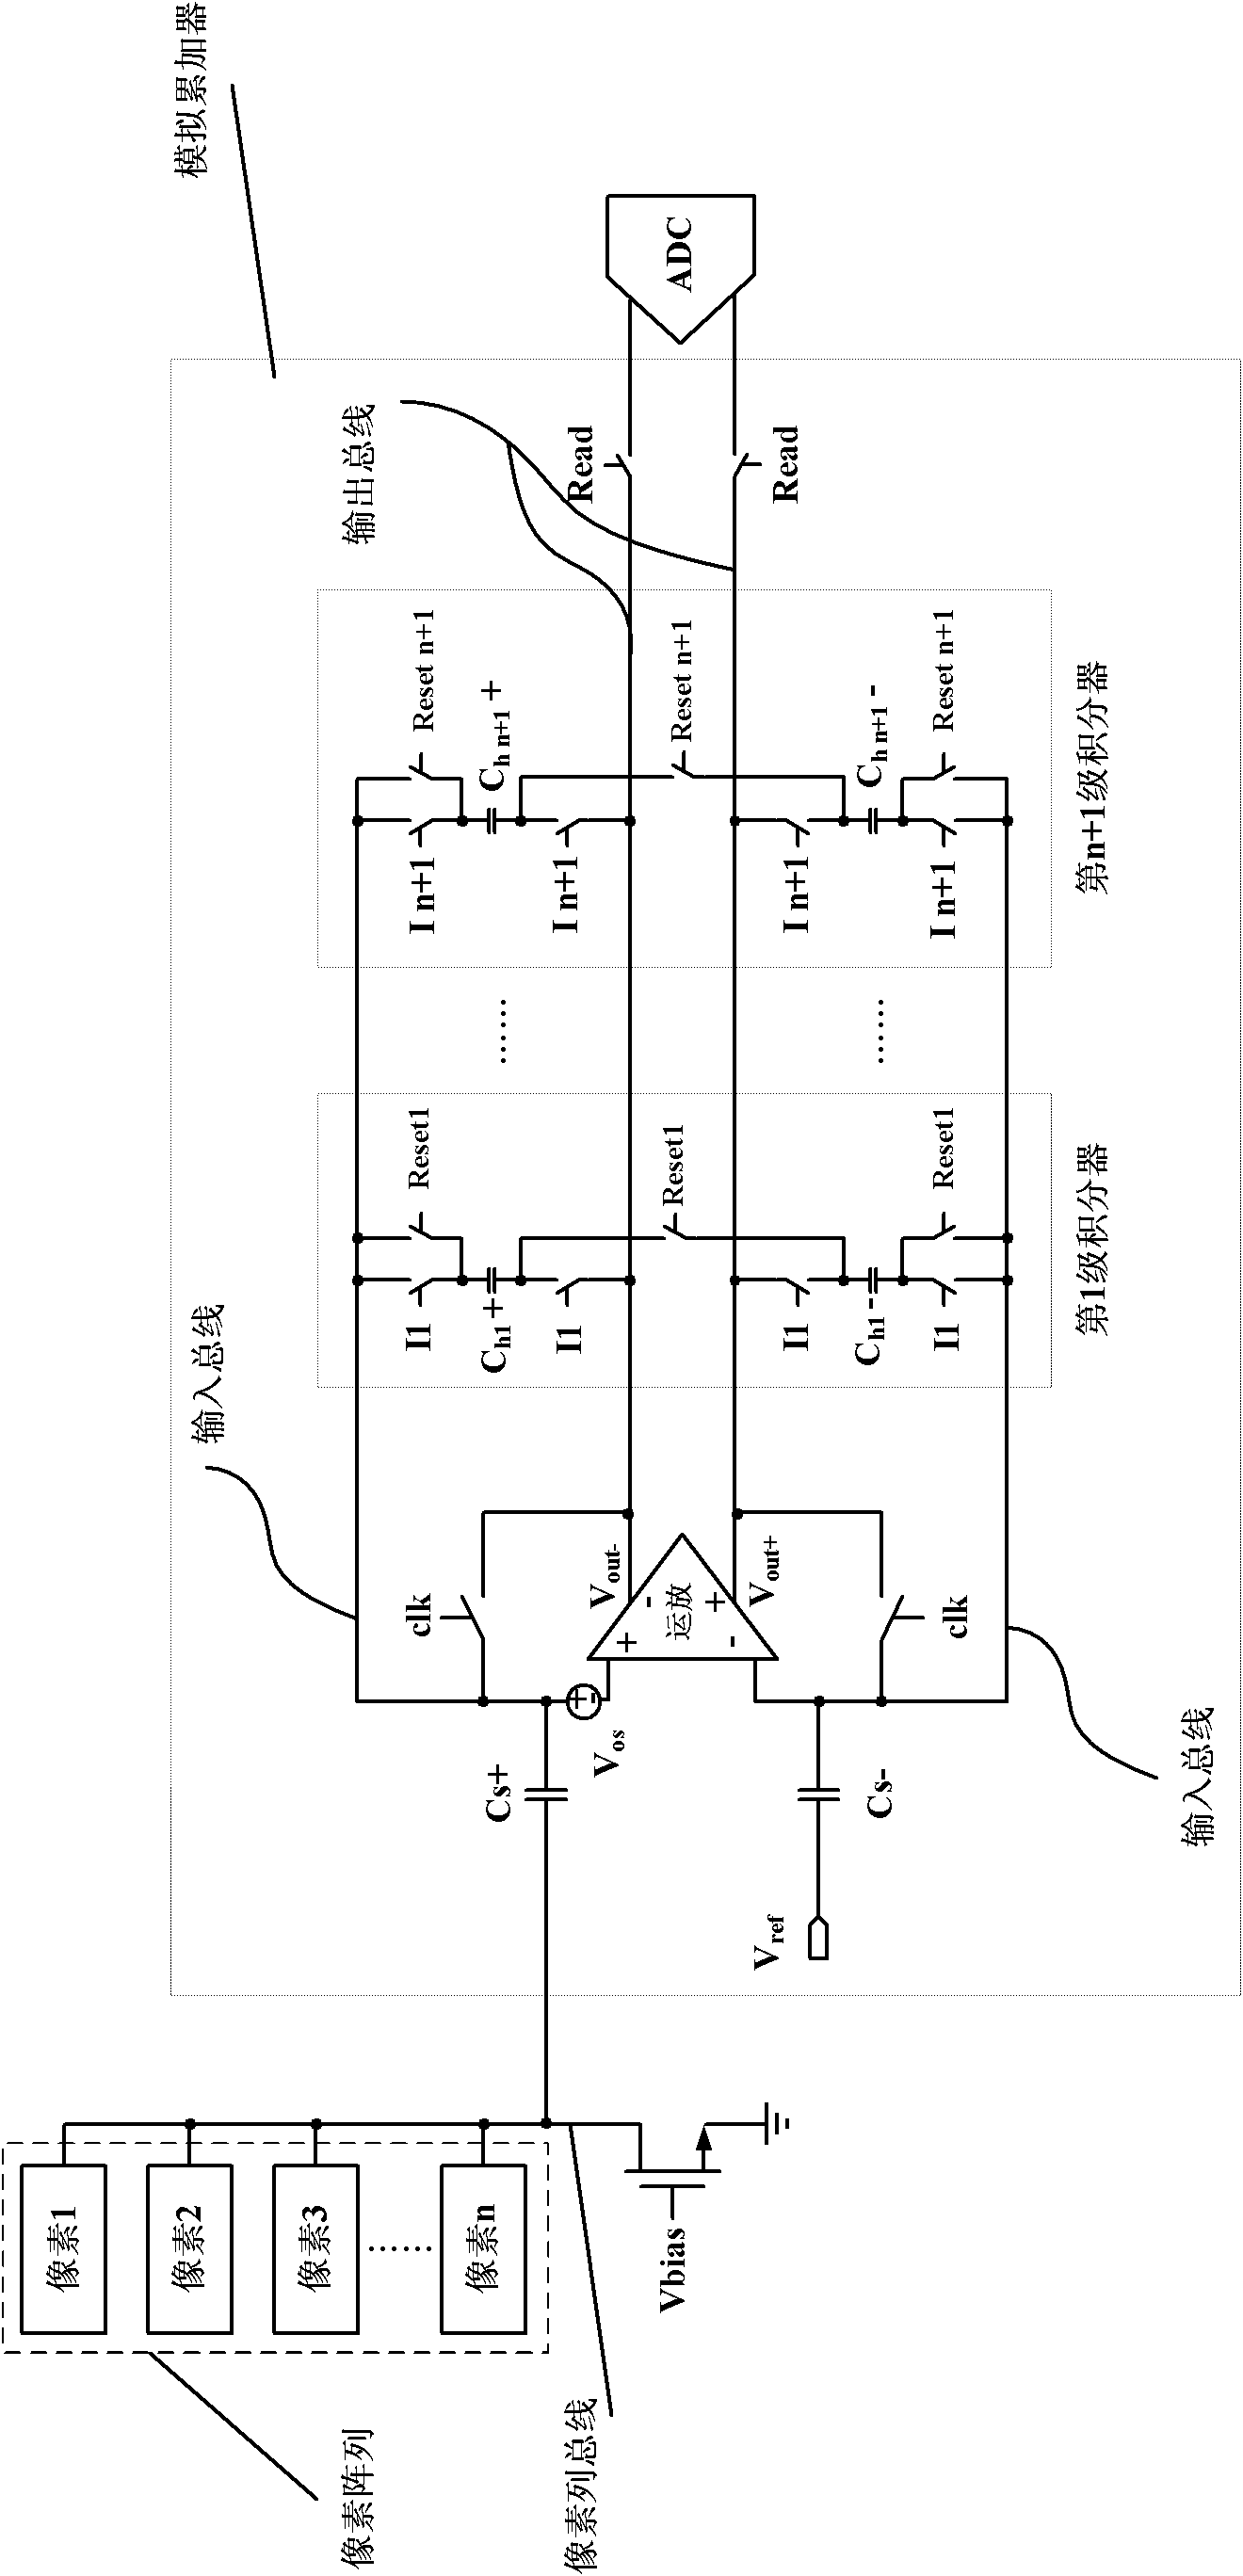 Analog accumulator capable of implementing time delay integration (TDI) function inside complementary metal-oxide semiconductor (CMOS) image sensor